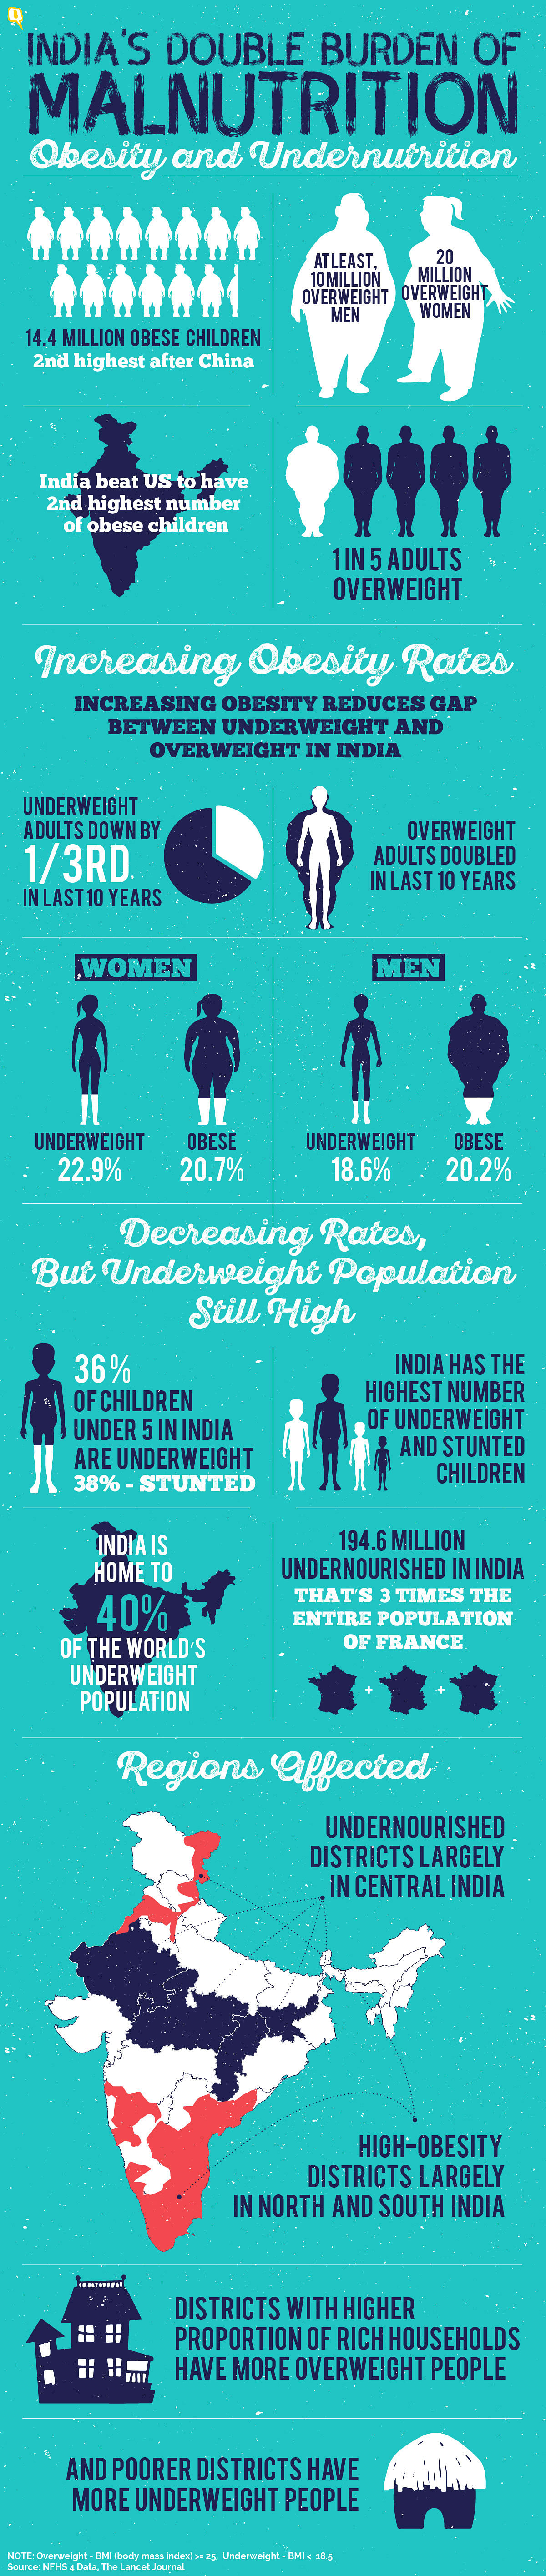 

India’s double burden of malnutrition – obesity and undernutrition.